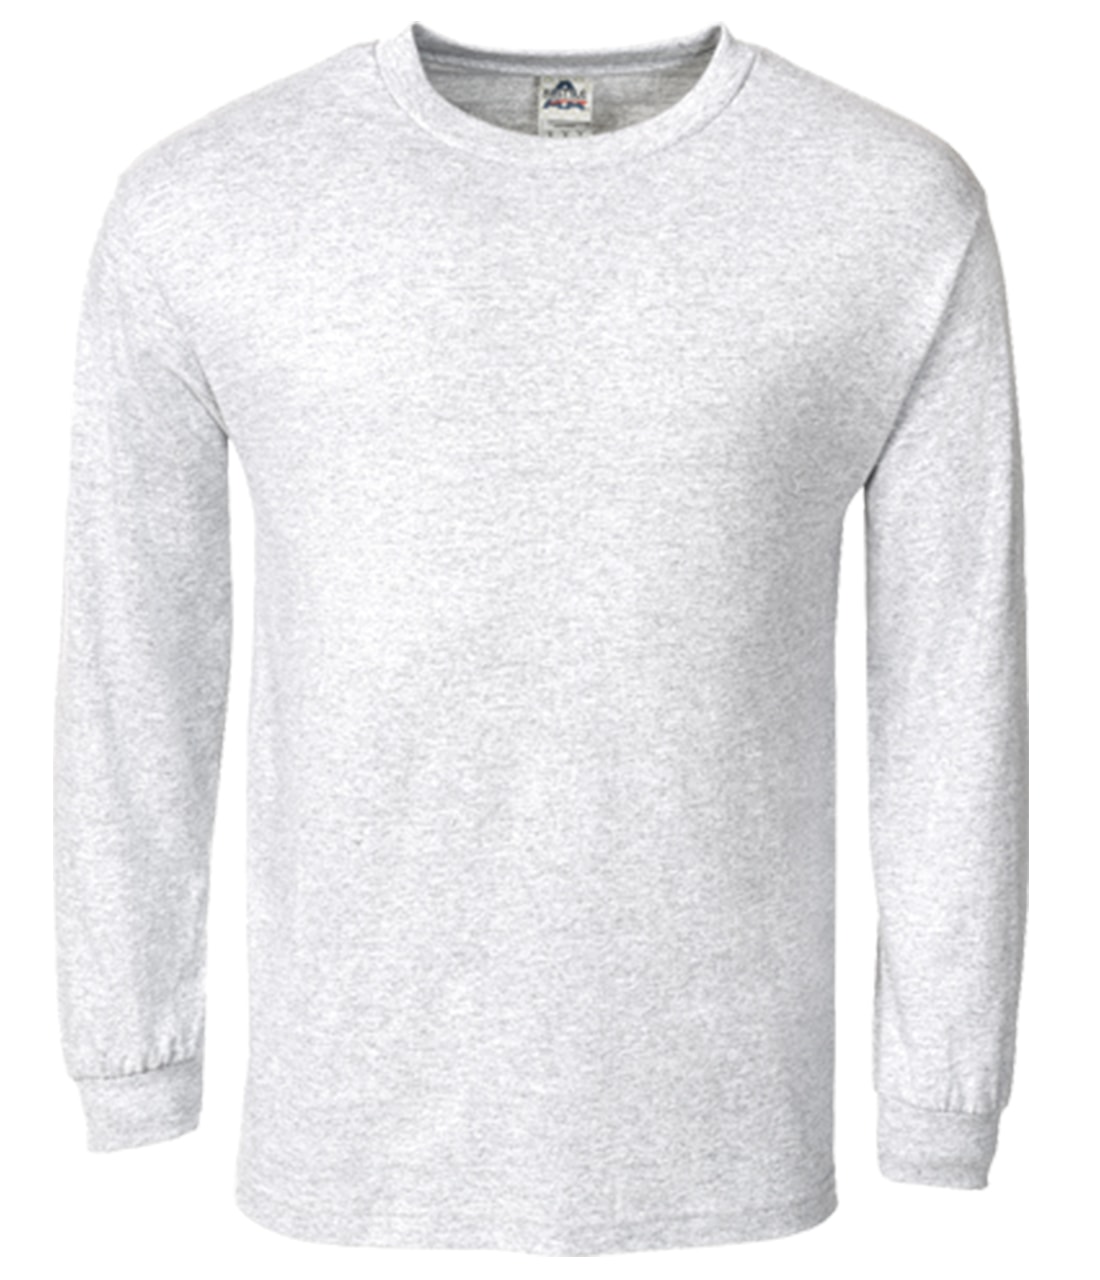 Picture of American Apparel Unisex Heavyweight Cotton Long Sleeve T-Shirt